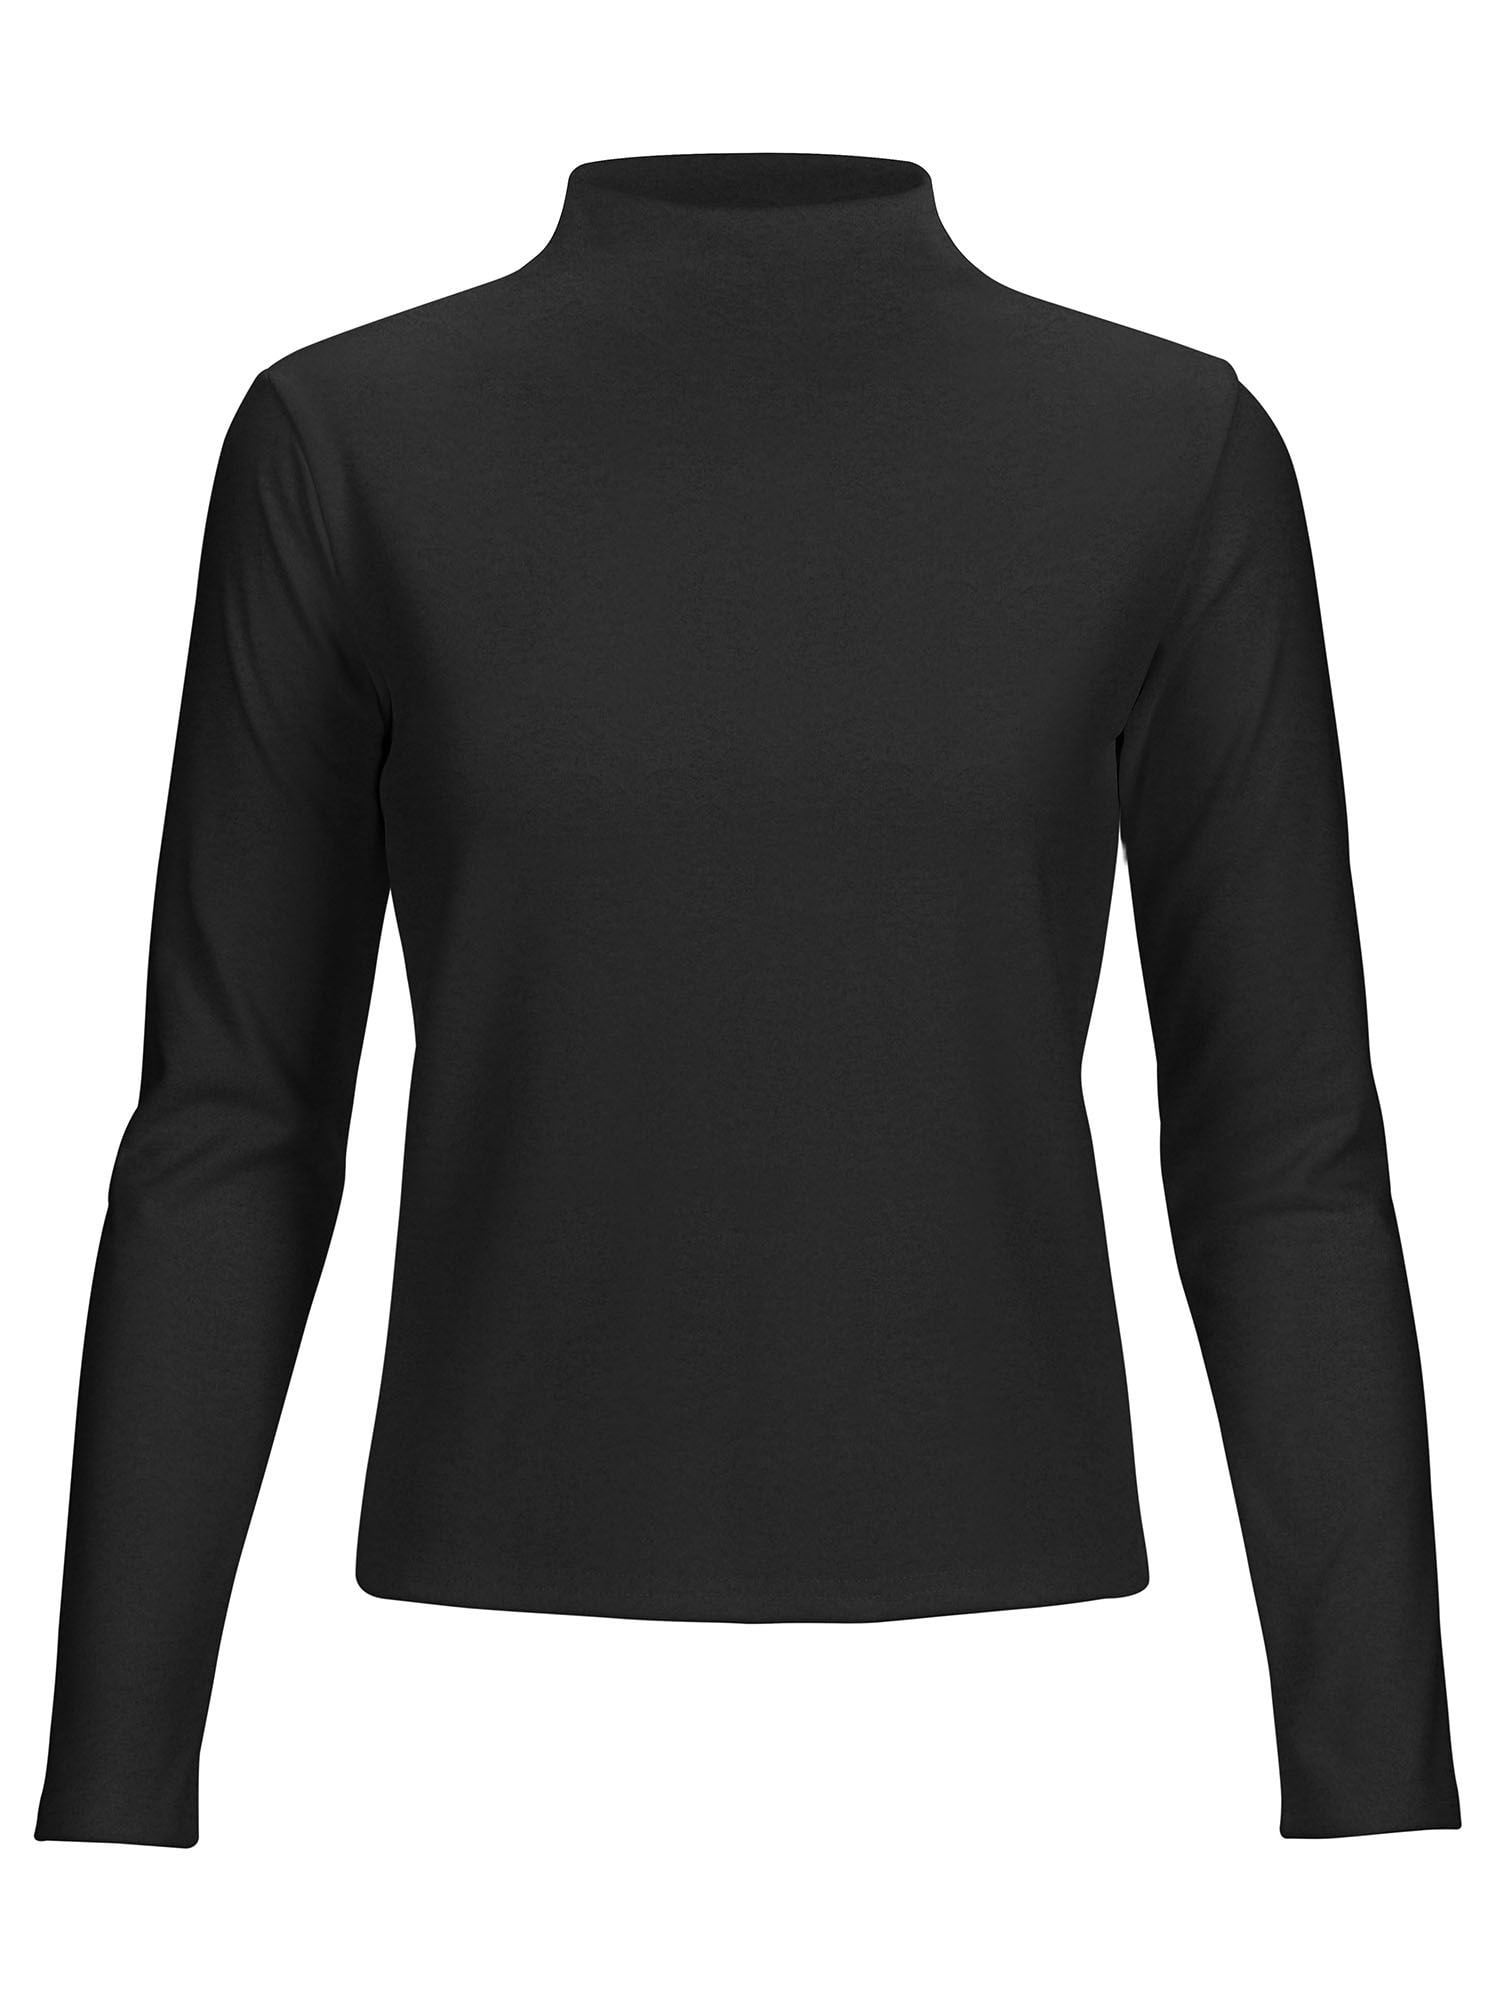 YepClick Womens Long Sleeve Turtleneck T-Shirts Casual Lightweight Slim Fit  Cozy Base Layer Top